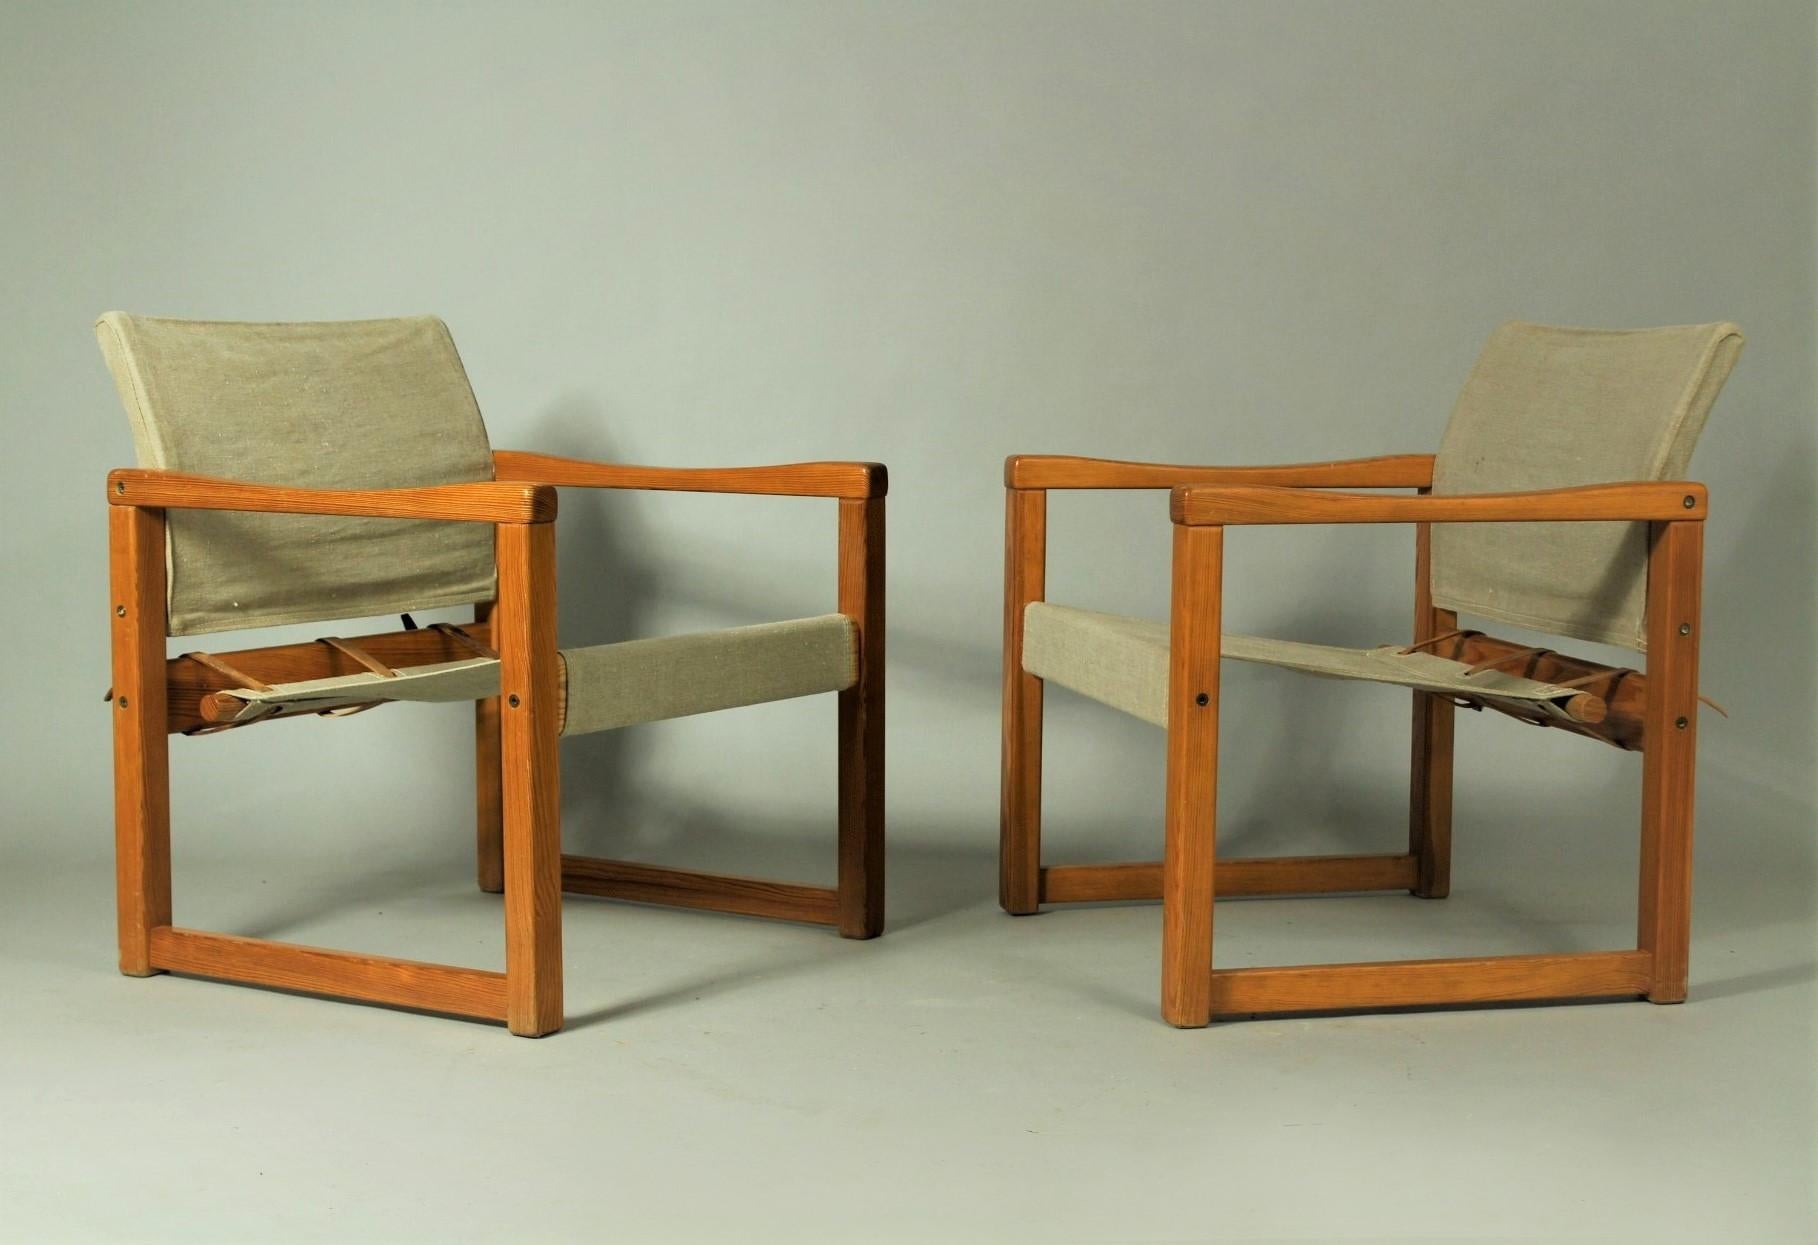 Pair of armchairs – model Diana designed by Karin Mobring, 1974. Produced by Ikea in Sweden. The frame is made in lacquered pine, and the upholstery is made in canvas. They are in good vintage condition.